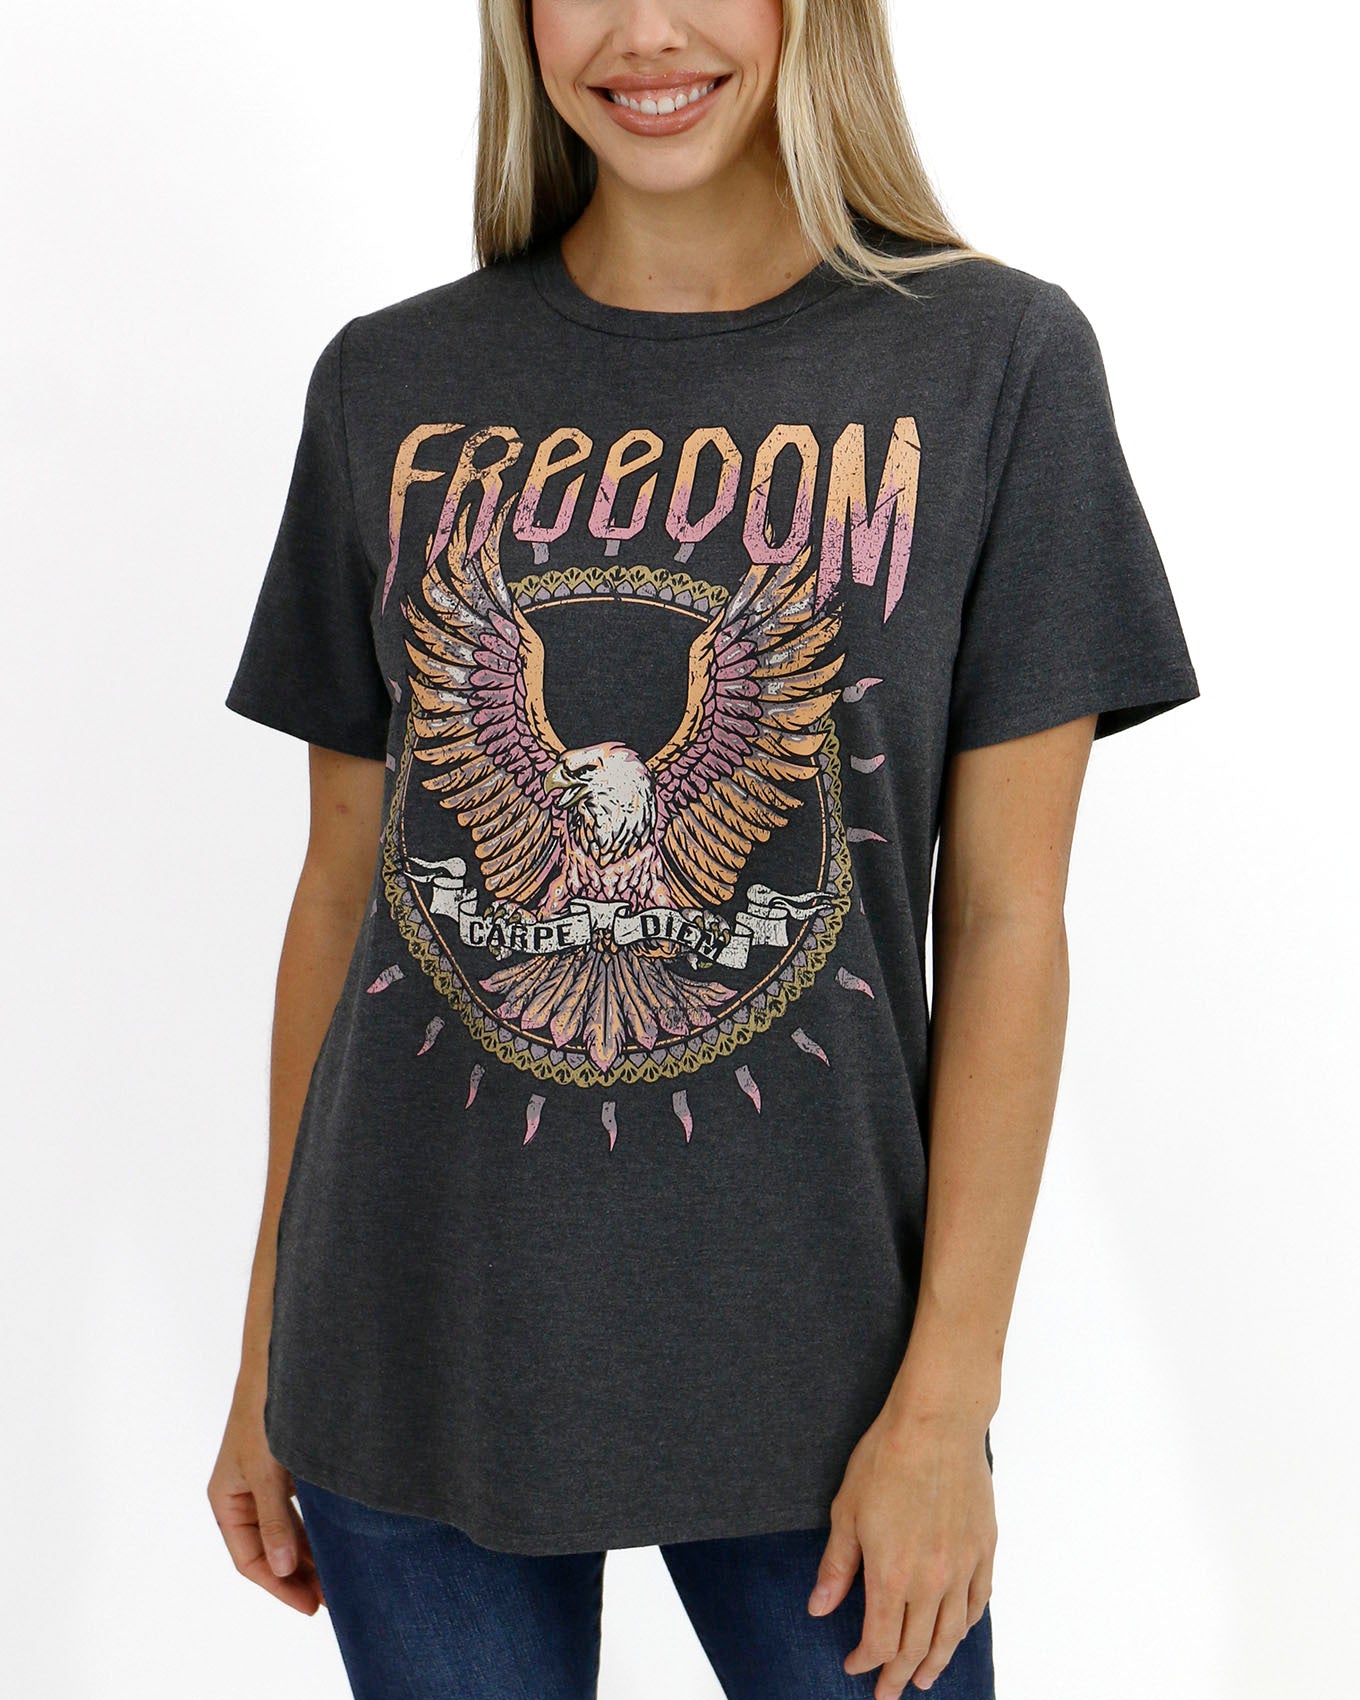 Front stock shot of Girlfriend Fit Graphic Tee - Freedom